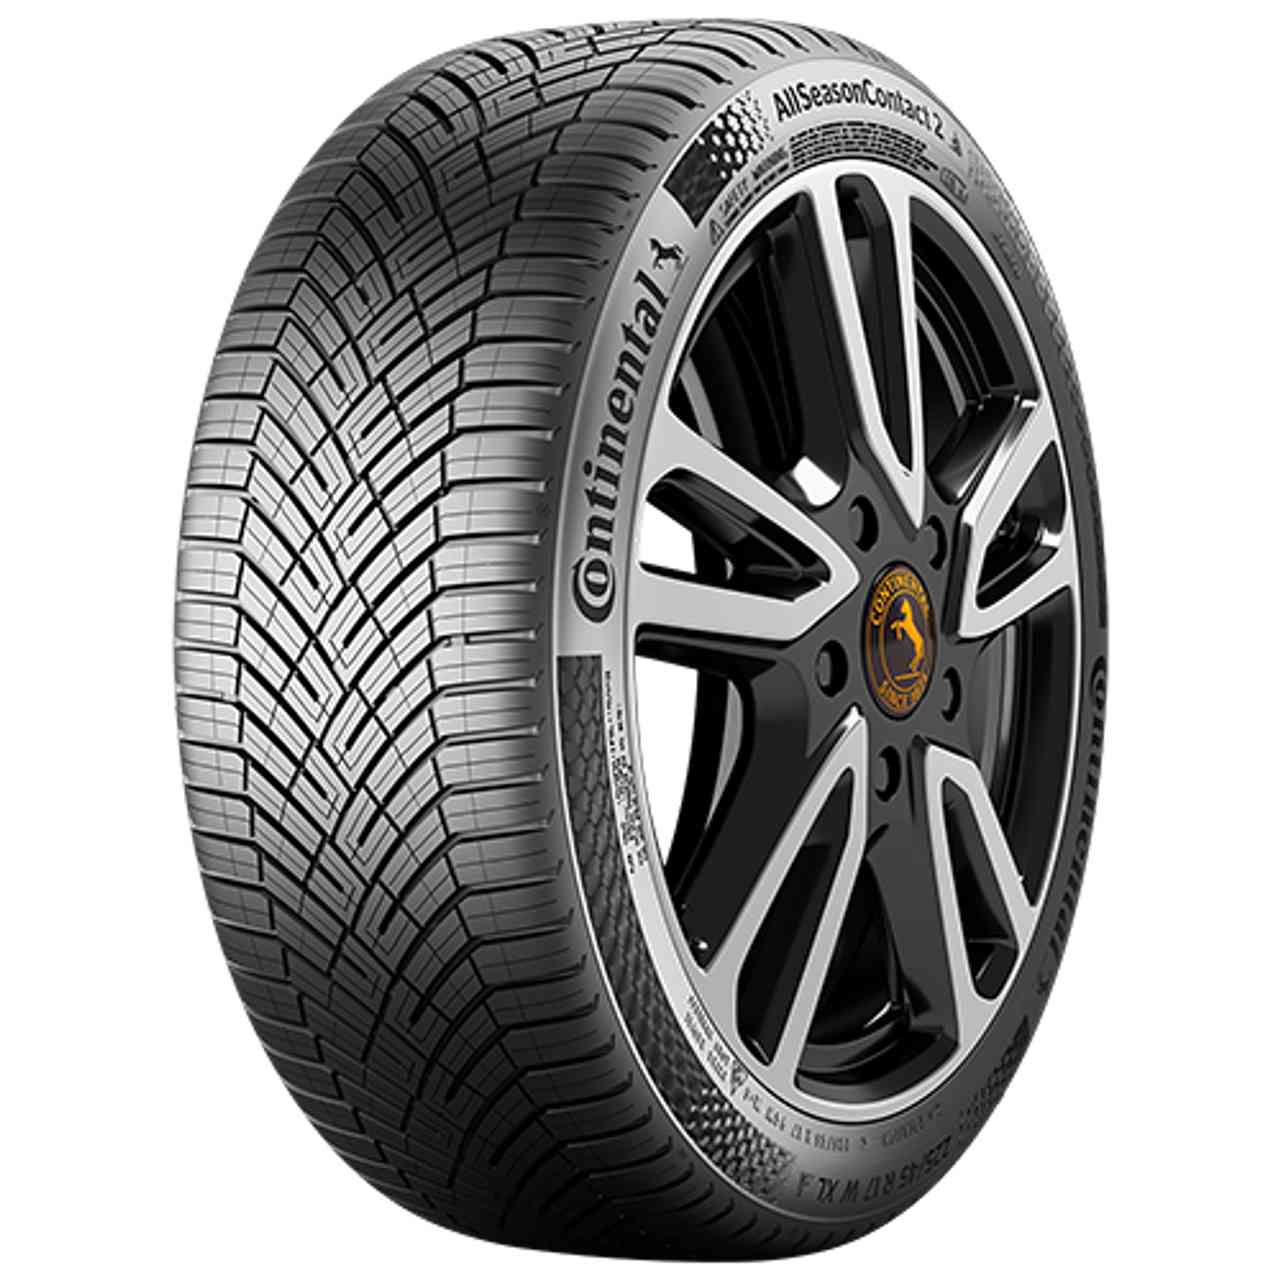 CONTINENTAL ALLSEASONCONTACT 2 (EVc) 205/55R16 94H BSW XL